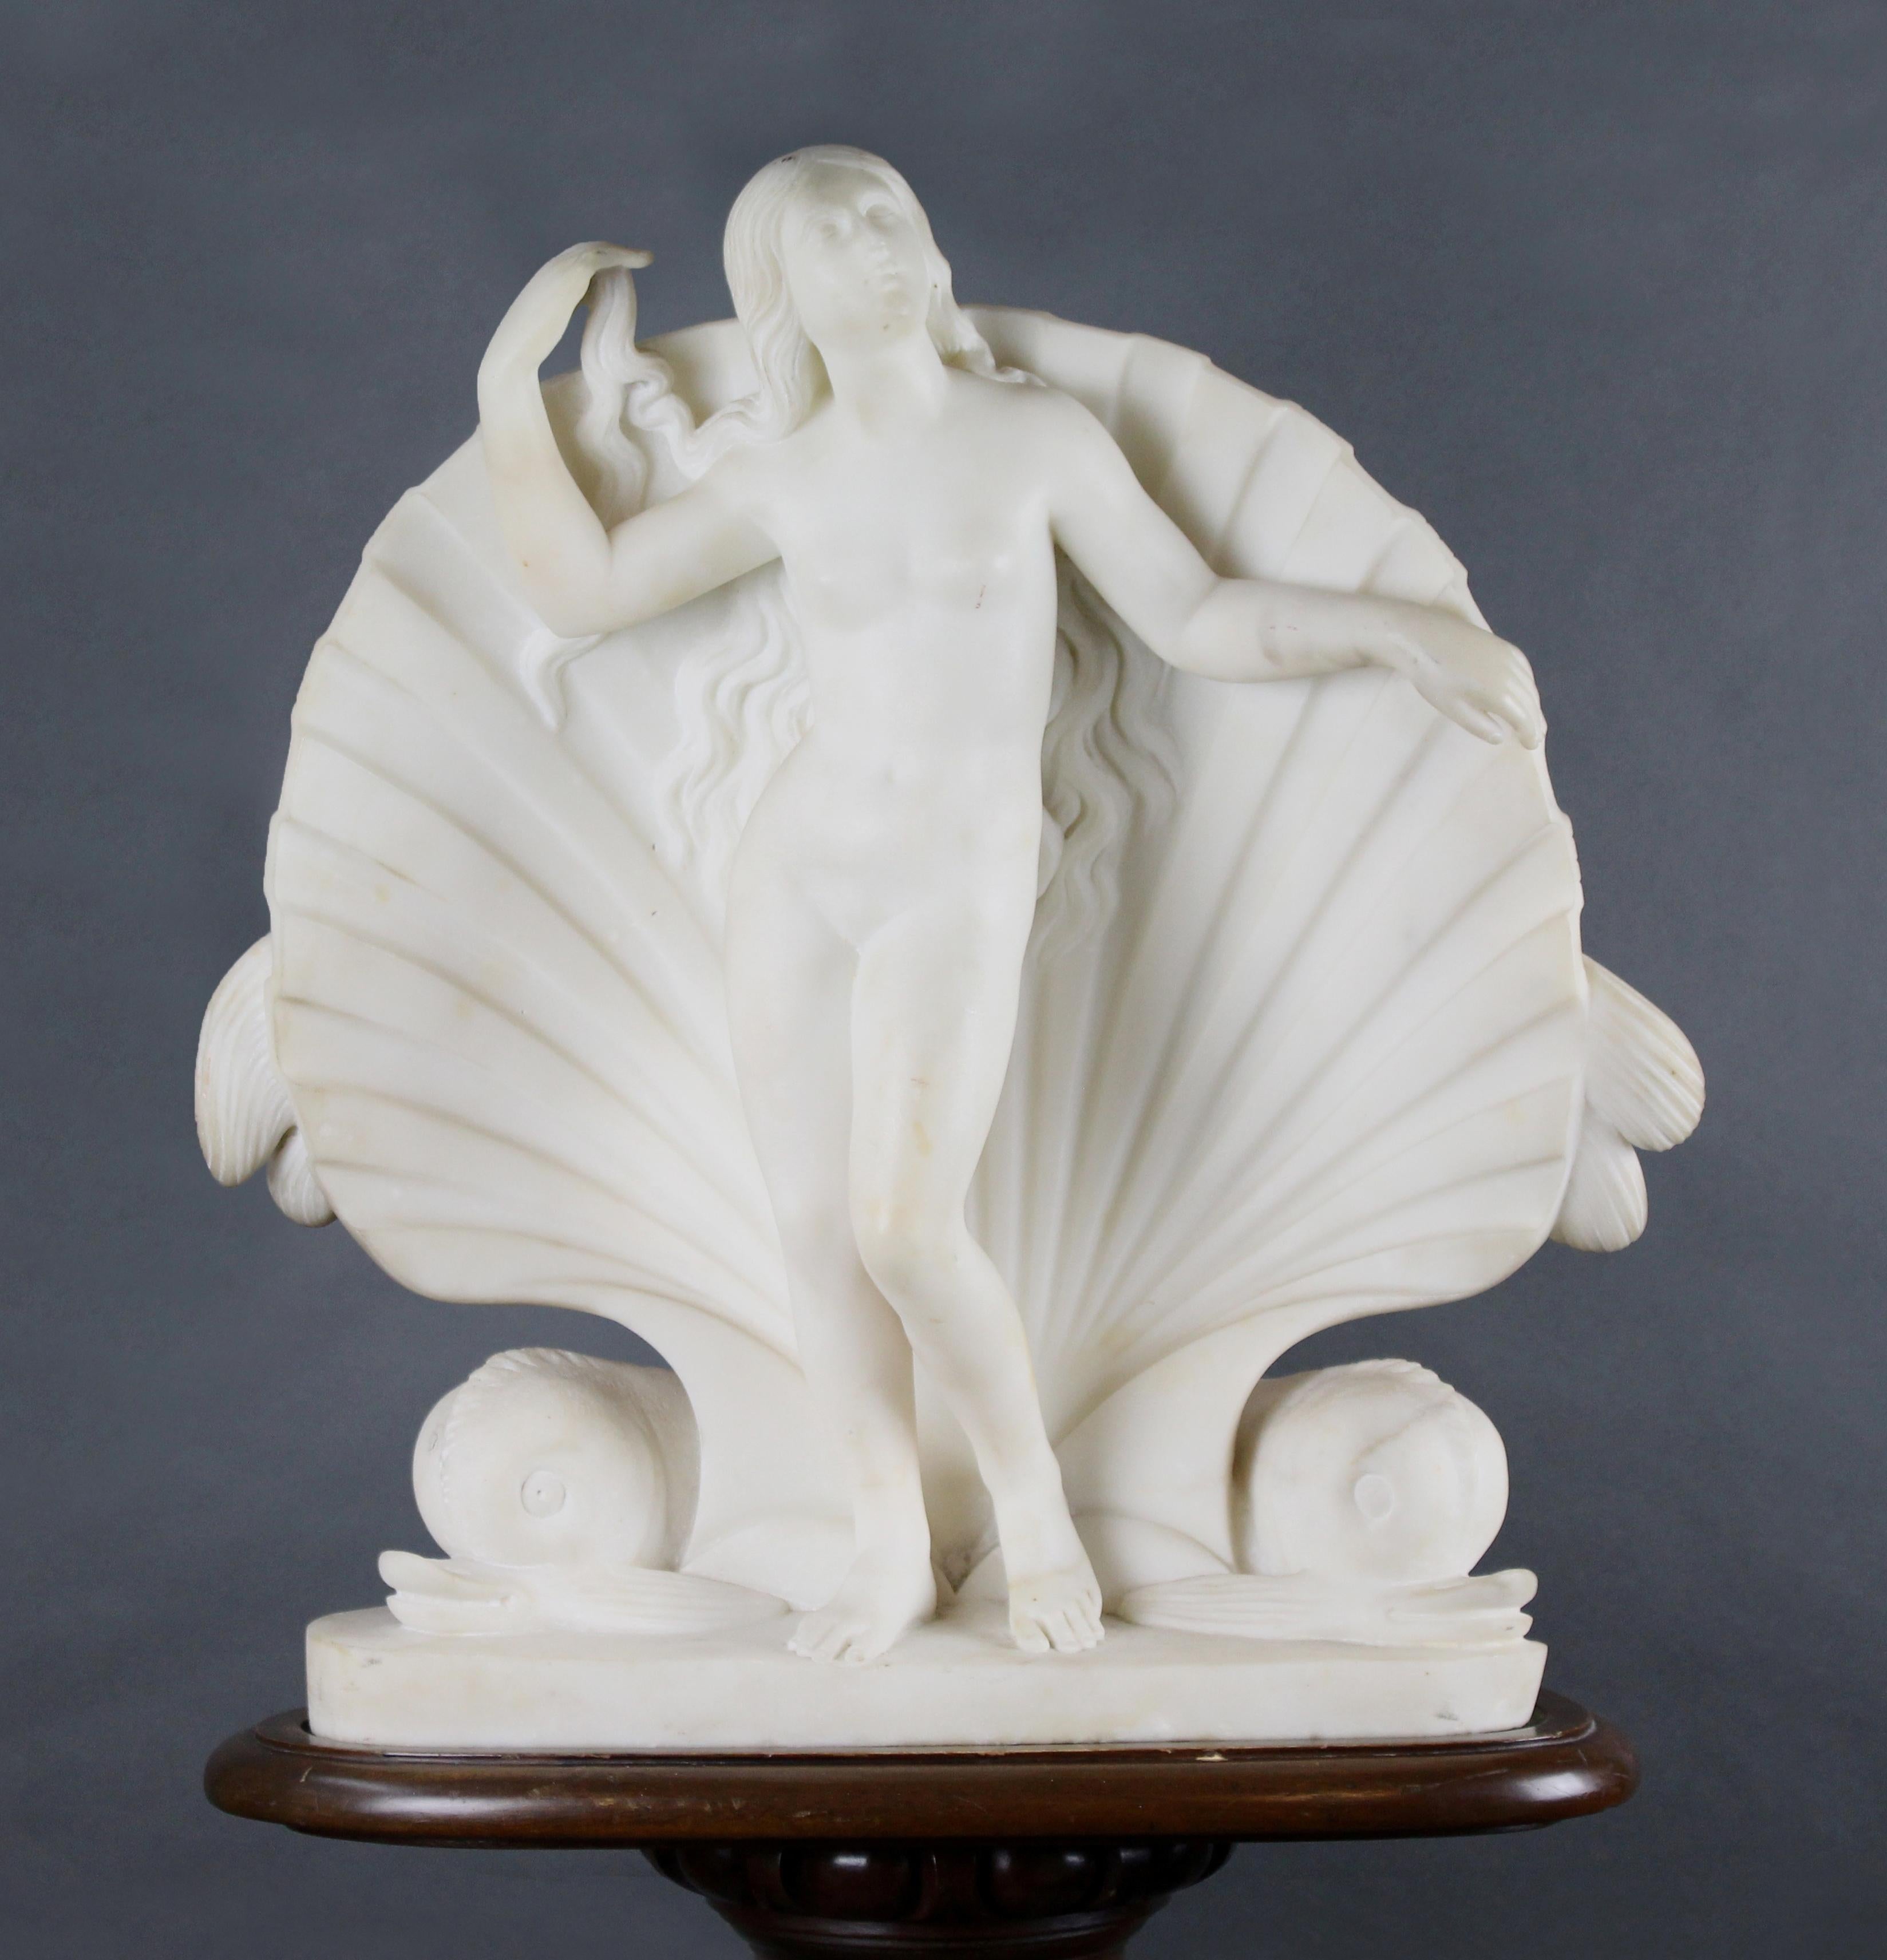 Period Regency, circa 1830
Composition marble sculpture on carved mahogany pedestal
Measures: Width 48 cm / 19 in
Depth 26 cm / 10 1/4 in
Total height 158 cm / 62 1/4 in
Figure height 52cm / 20 1/2in
Condition: Good condition. Little finger